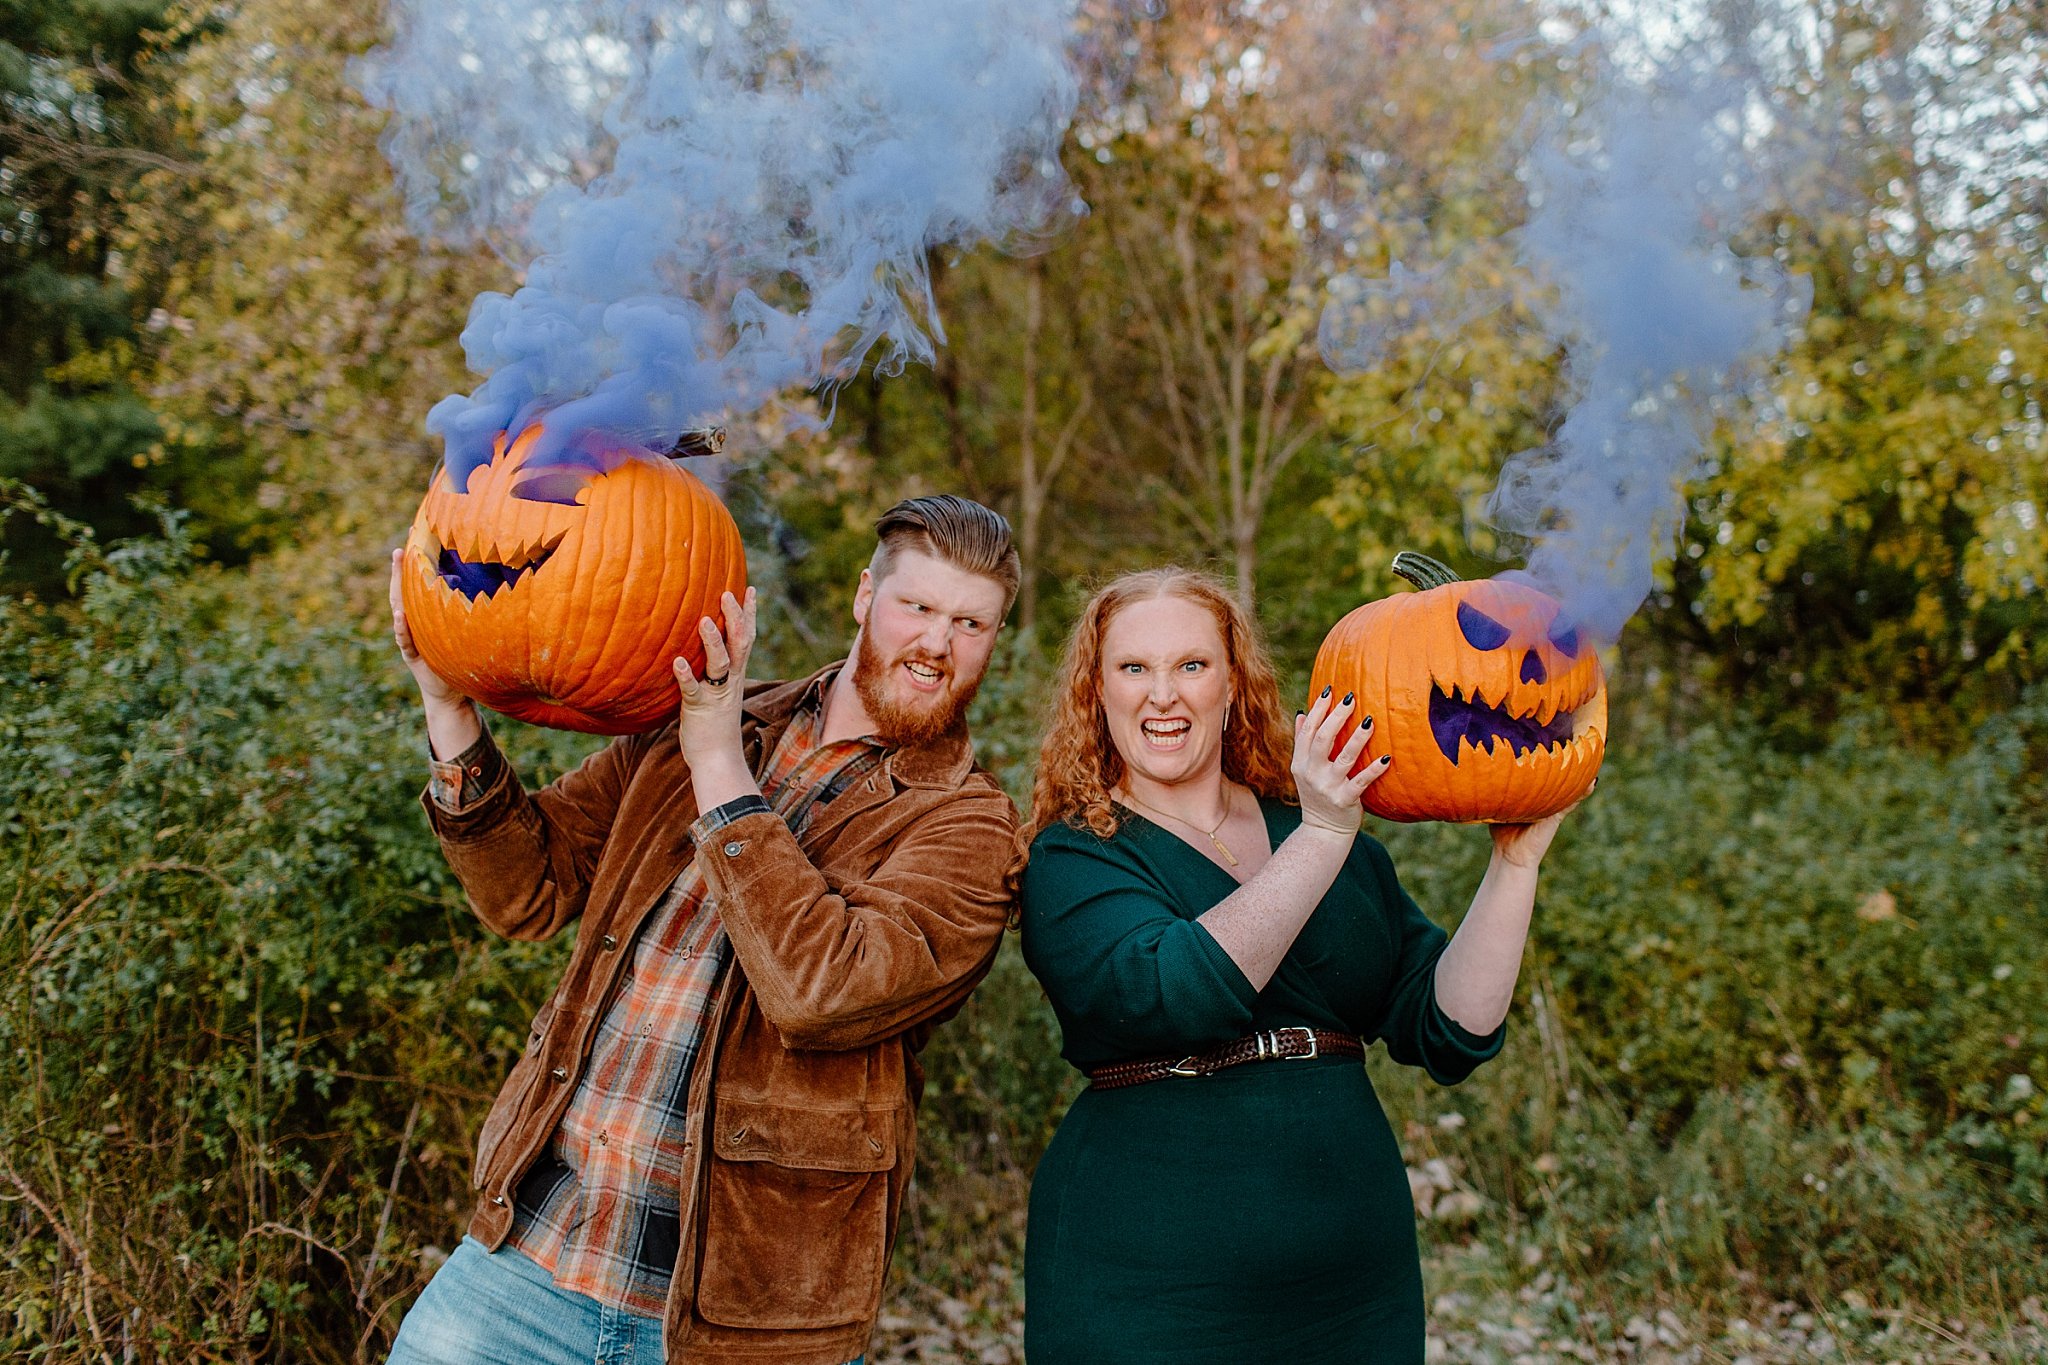  Man and woman peek out from behind carved pumpkins for Halloween engagement session 